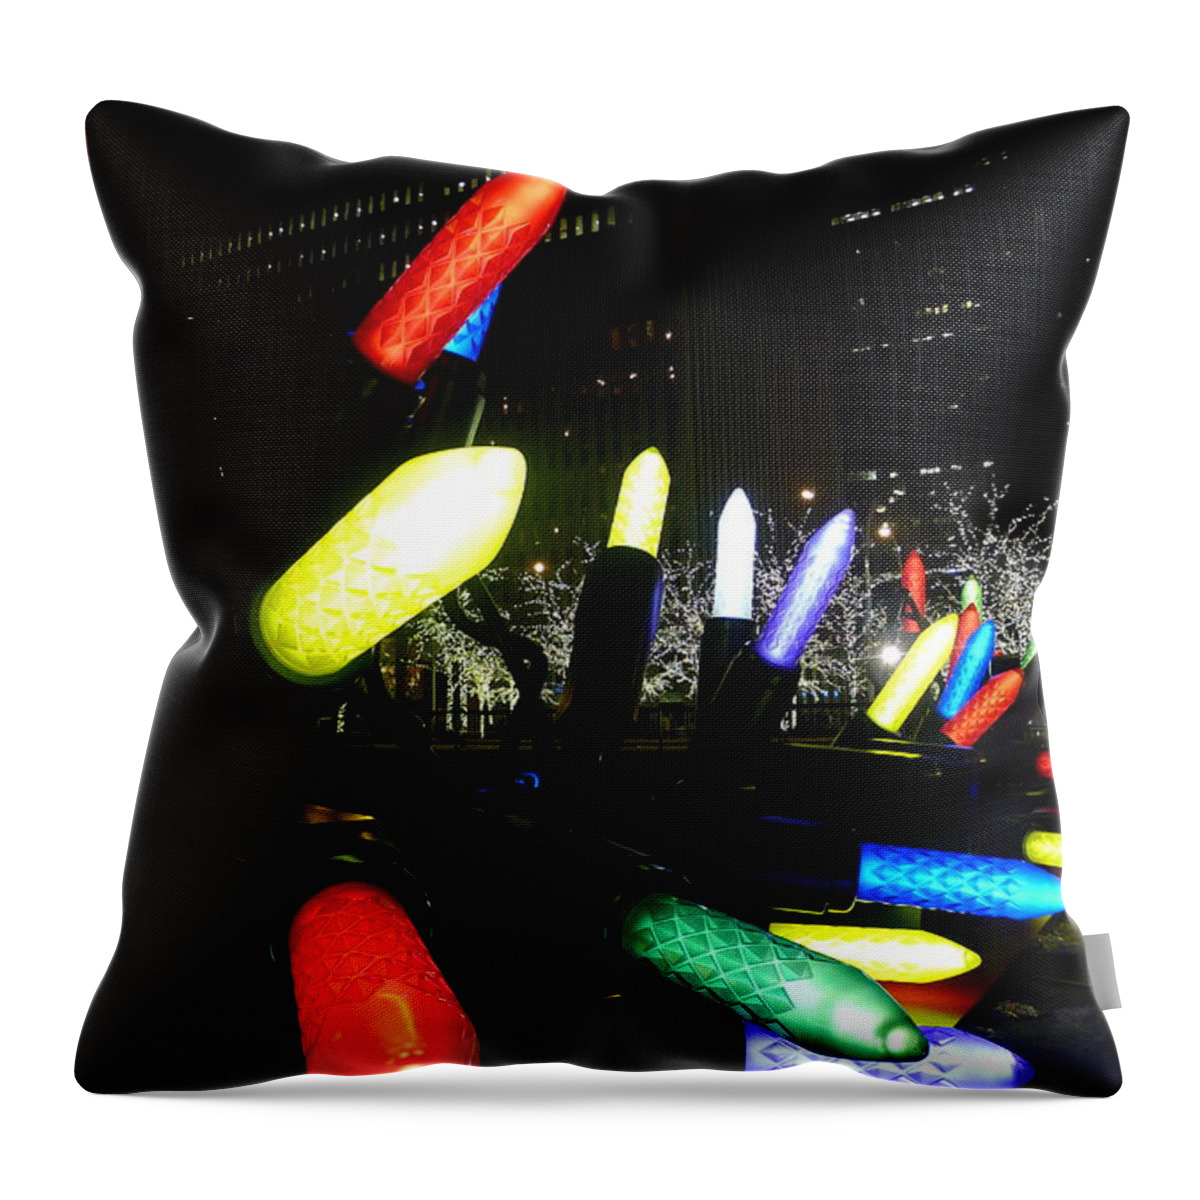 Decoration Throw Pillow featuring the photograph New York City Street Lights by Richard Reeve